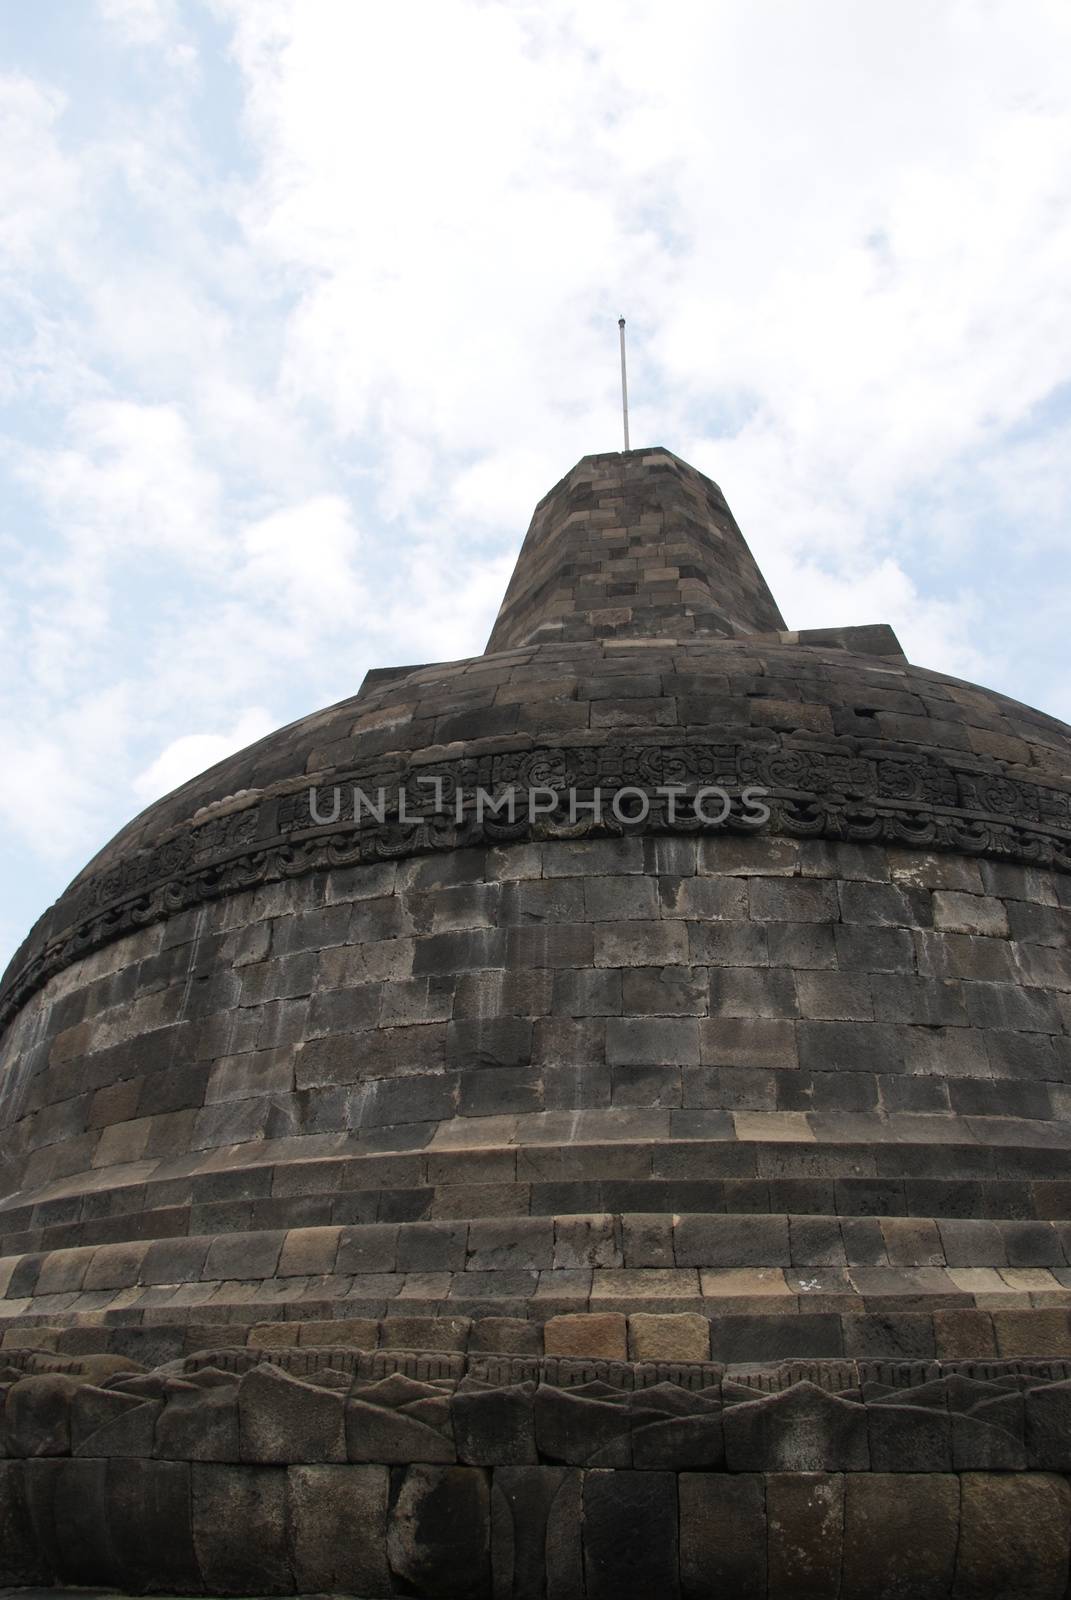 Around the circular platforms are 72 openwork stupas, each containing a statue of the Buddha. by craigansibin